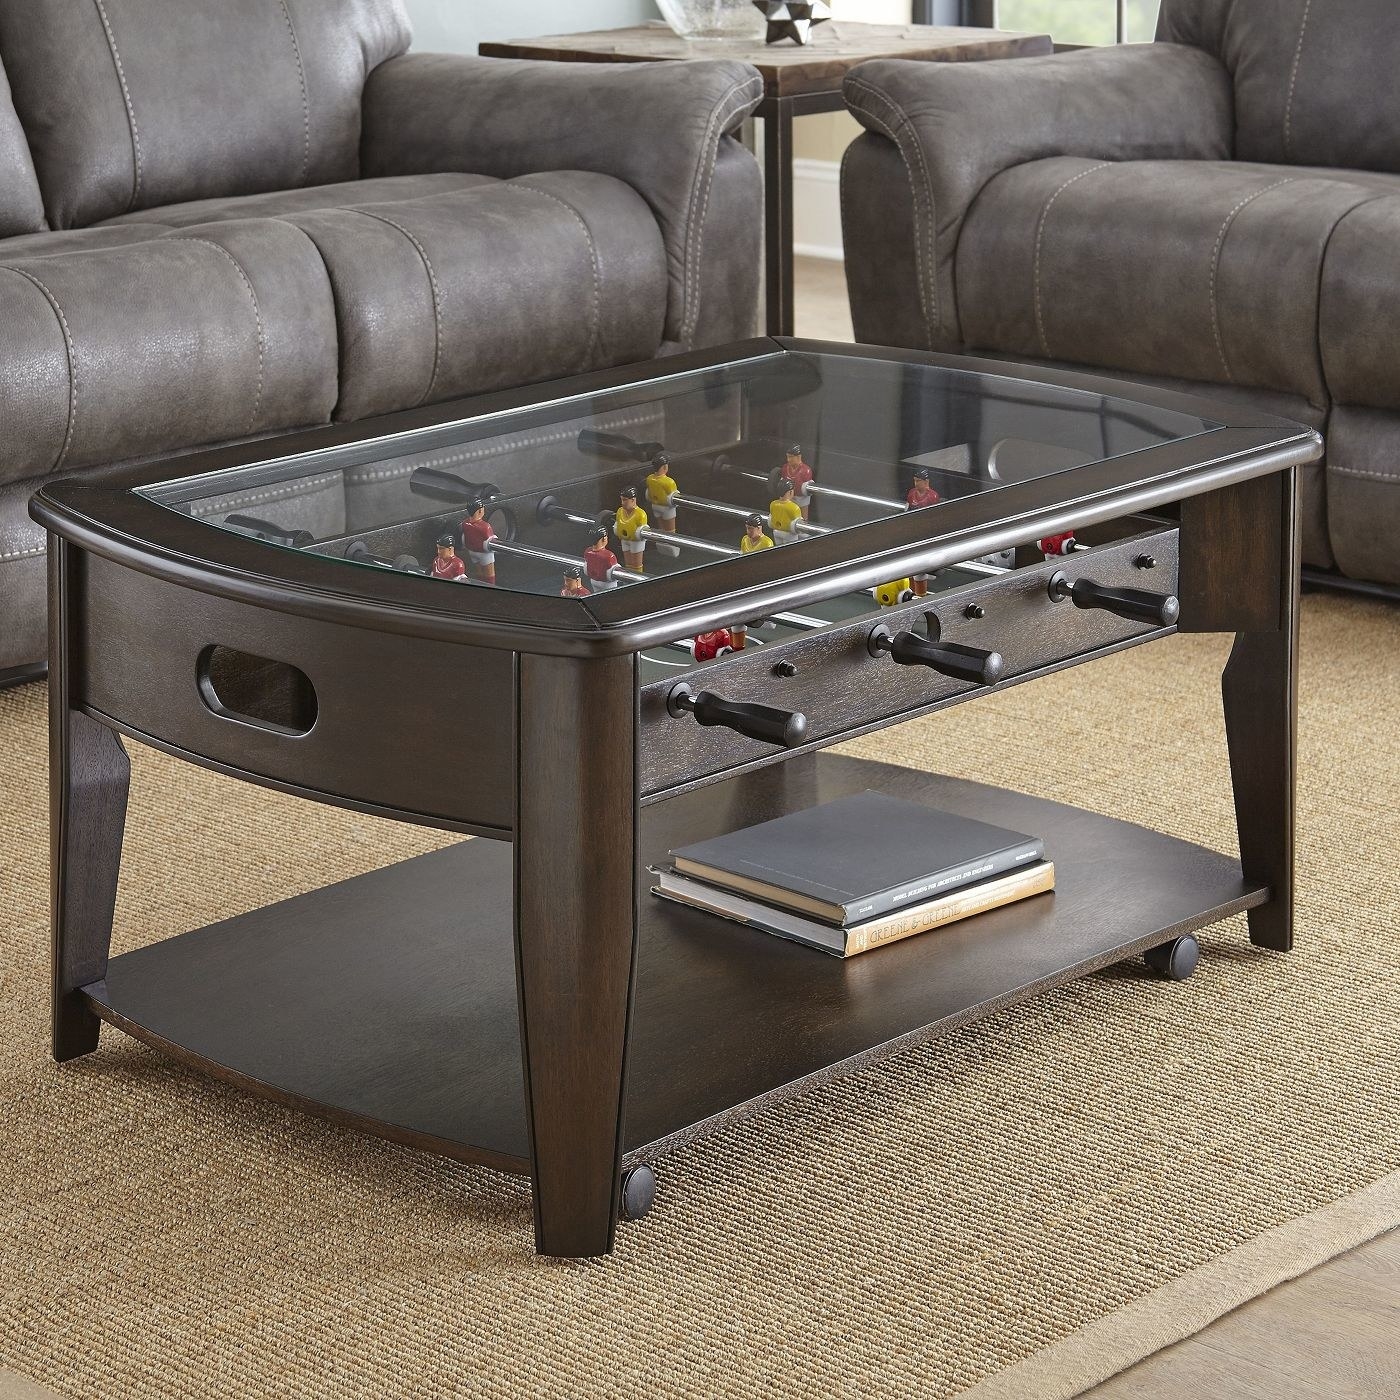 The dark brown coffee table with a foosball game built in under the glass